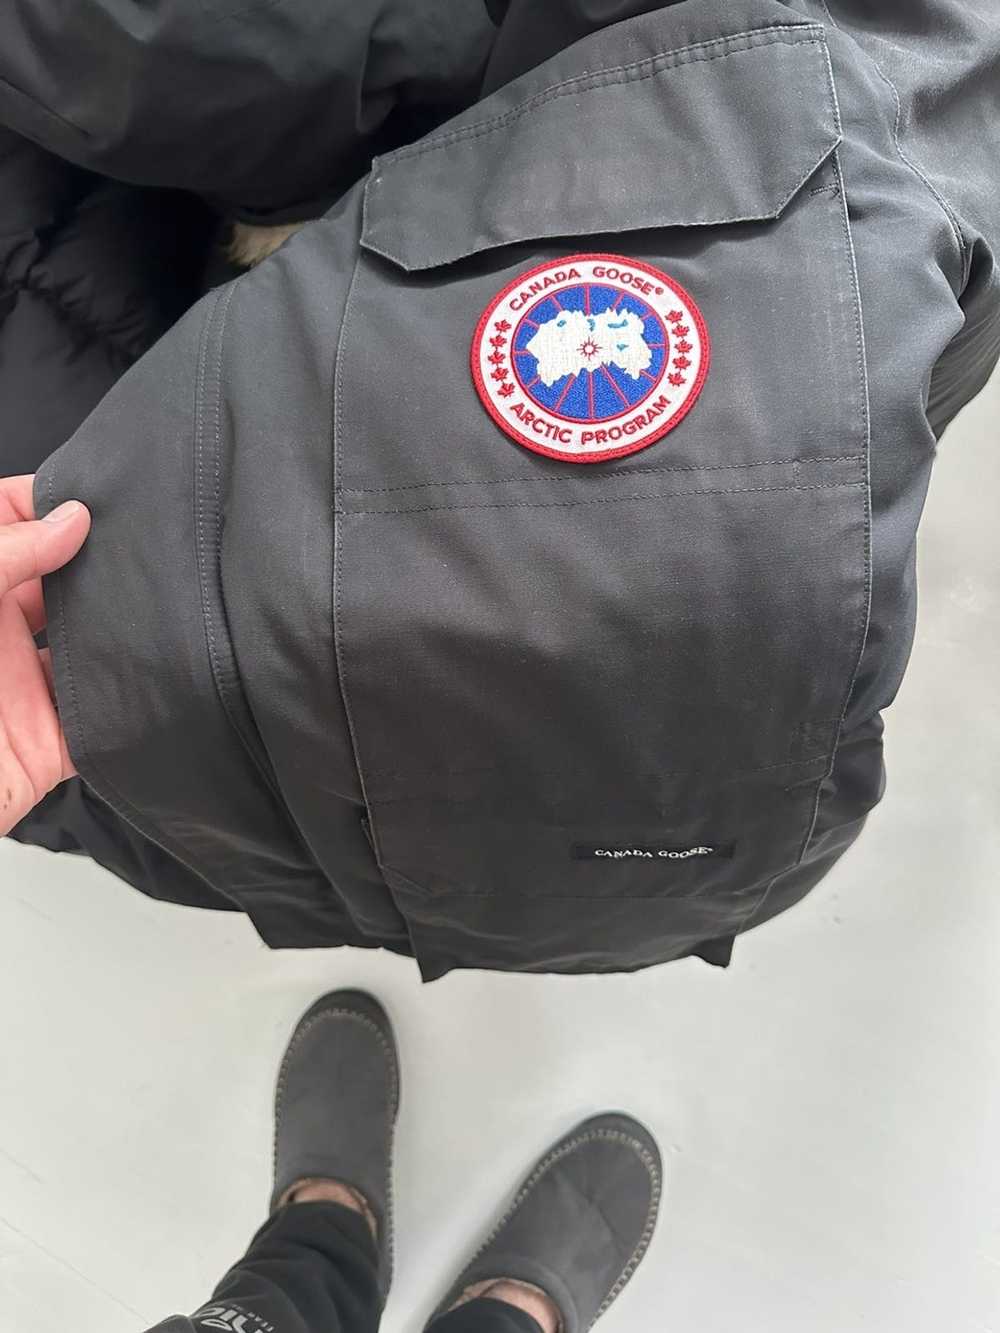 Canada Goose Expedition Parka - image 7